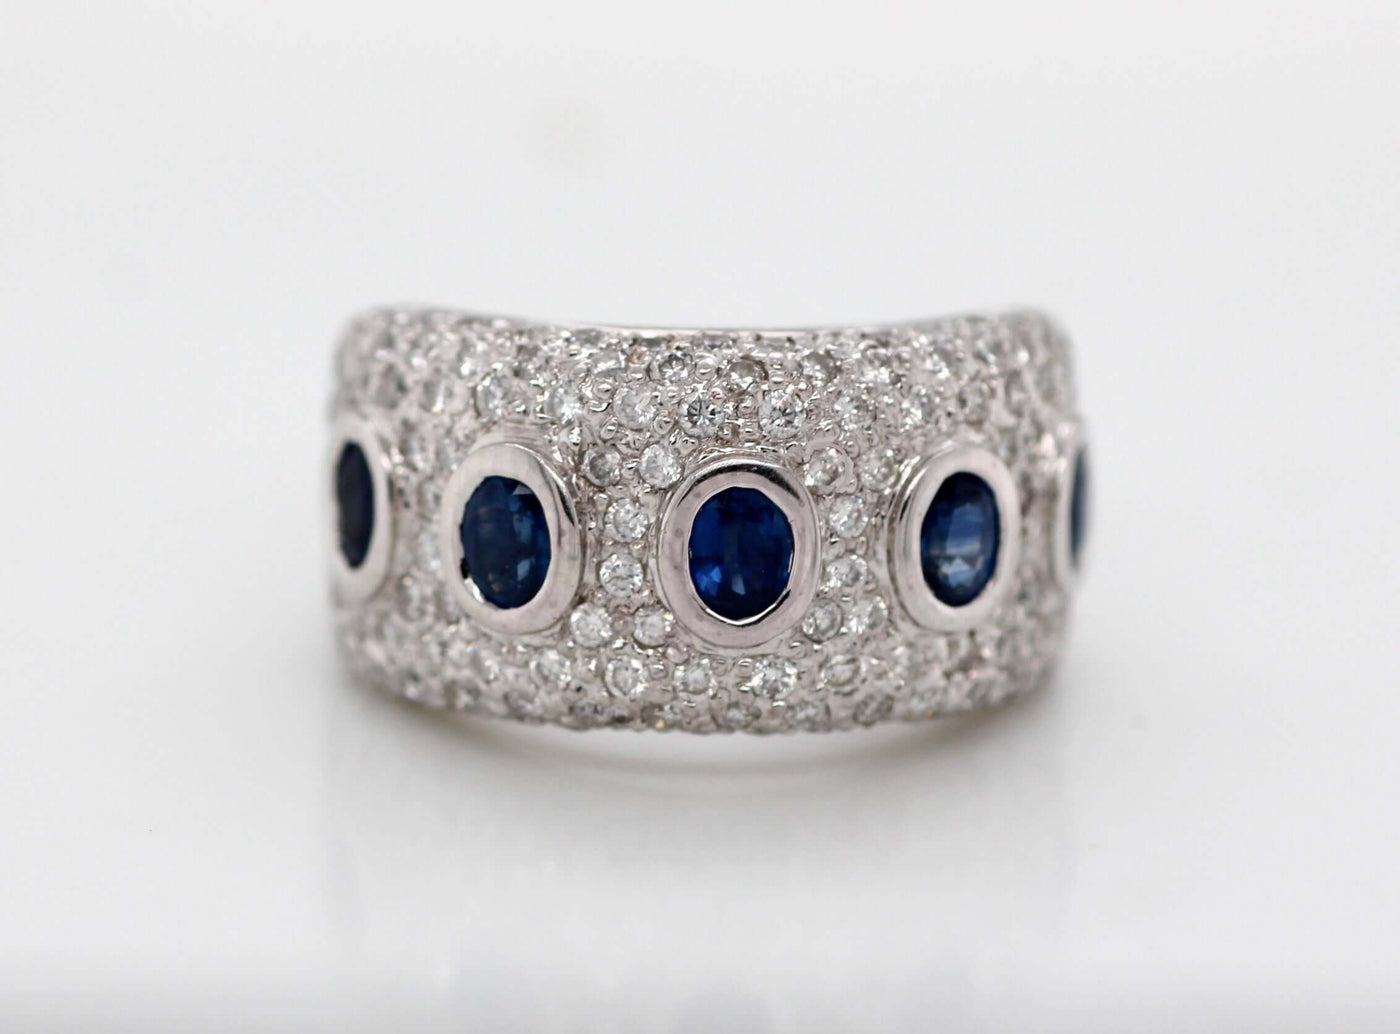 18KW 1.50 CTTW SAPPHIRE AND DIAMOND RING , 1.05 CTTW H-SI2